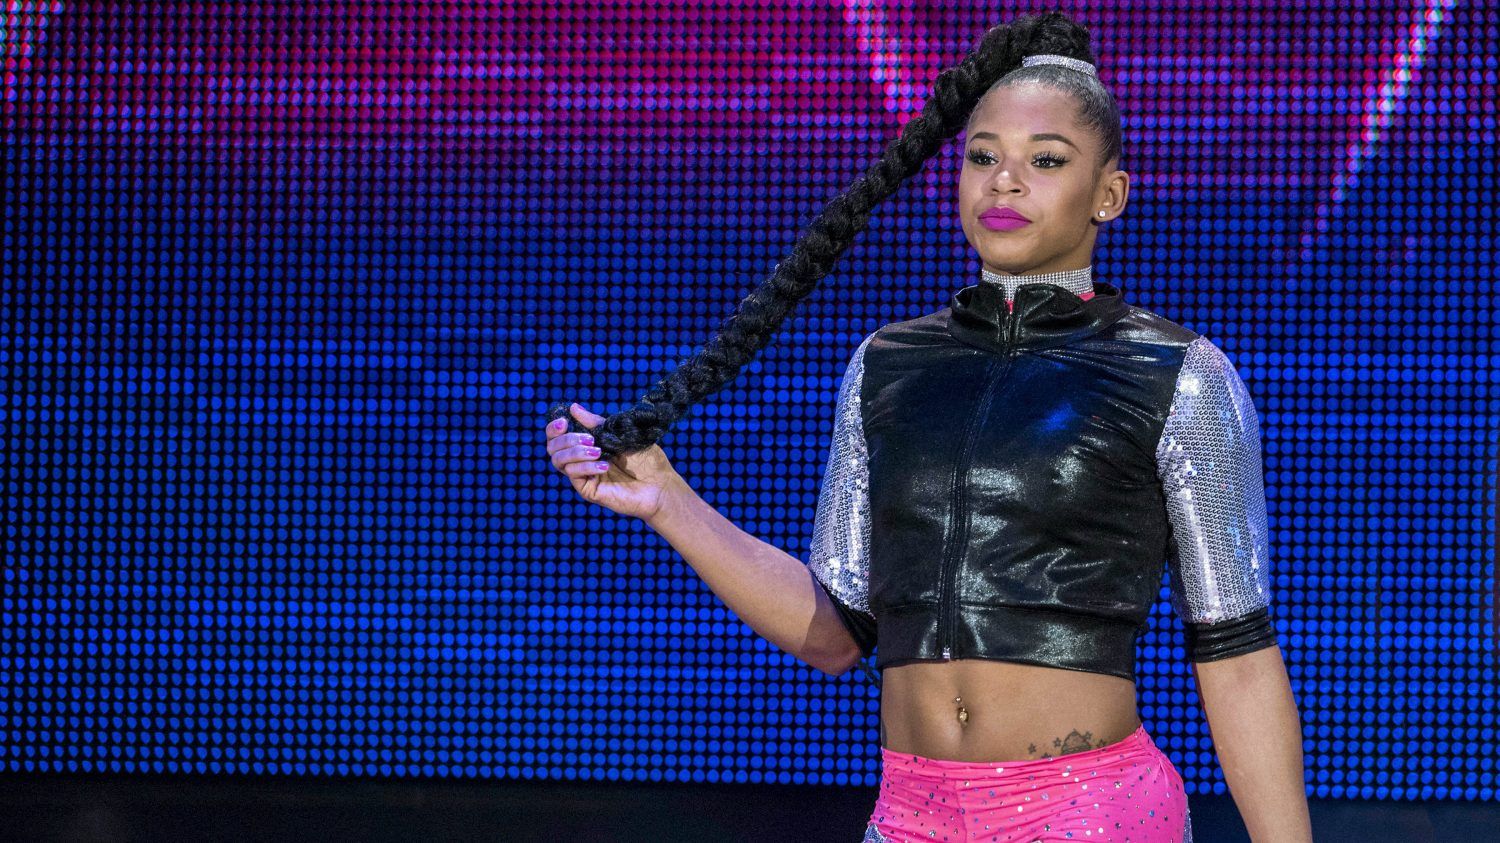 Step into the ring with WWE NXT star Bianca Belair